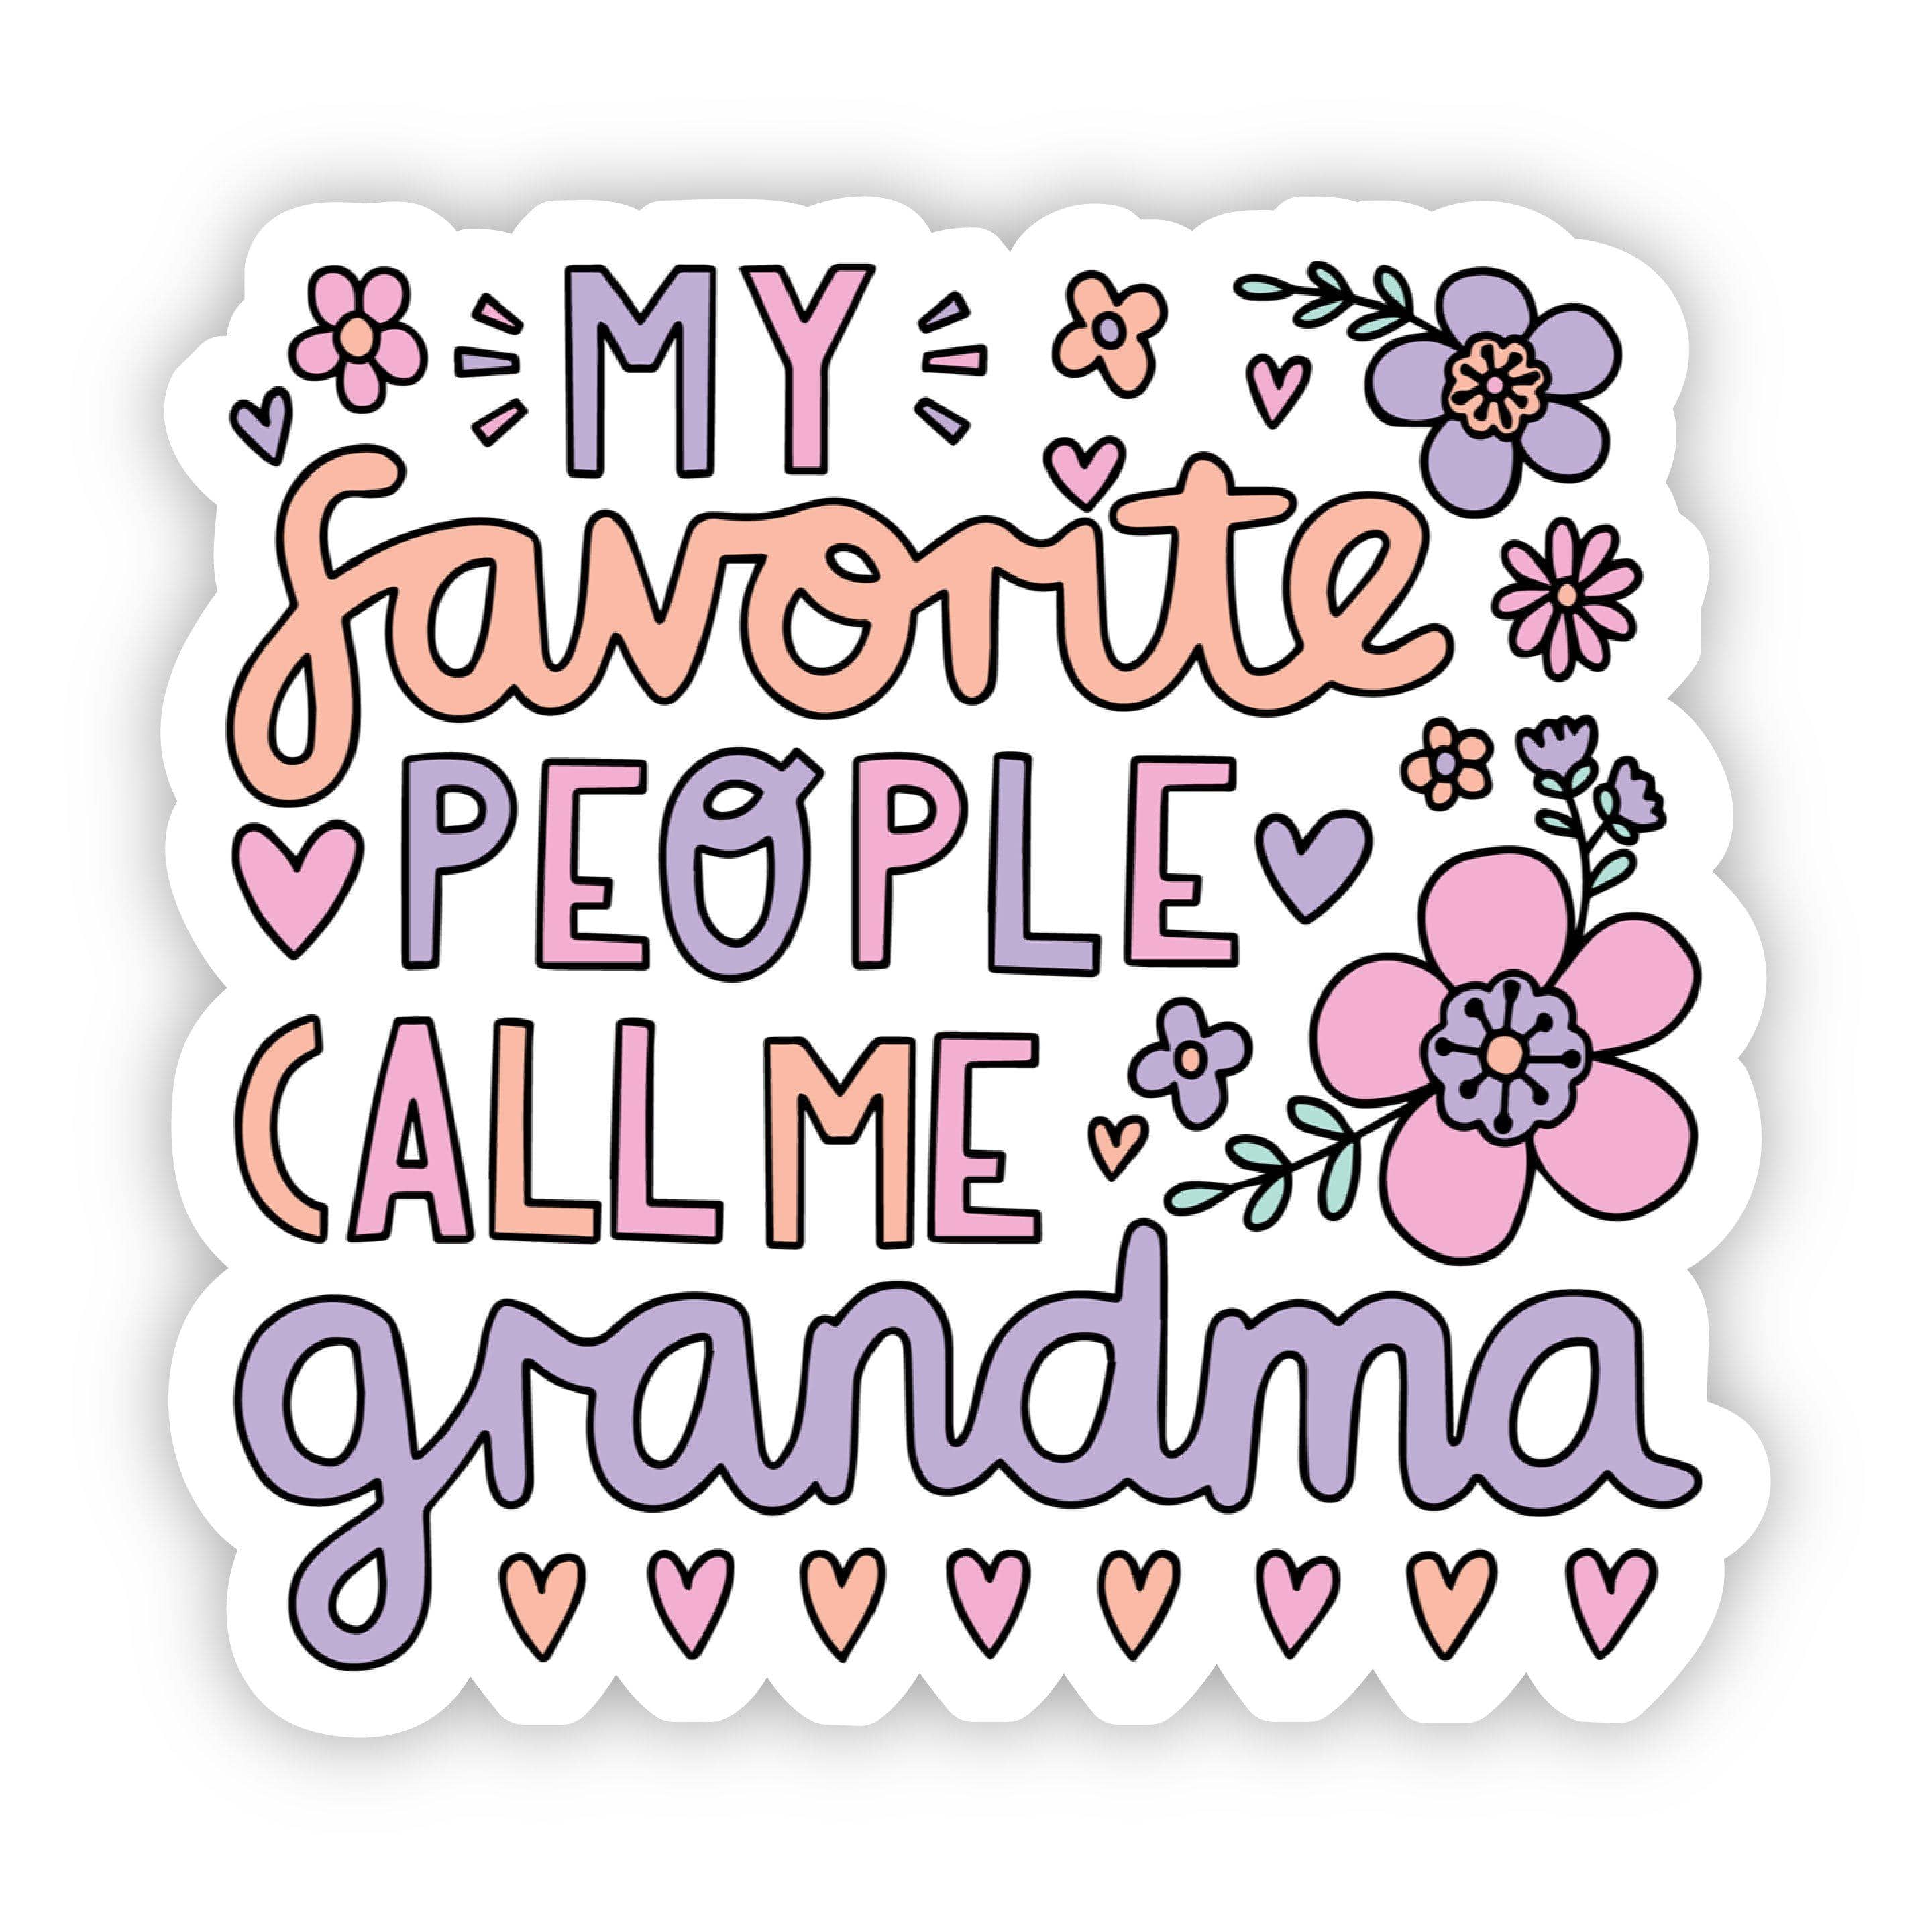 stop calling me curvy, I'm a globy diva Sticker for Sale by themoniae